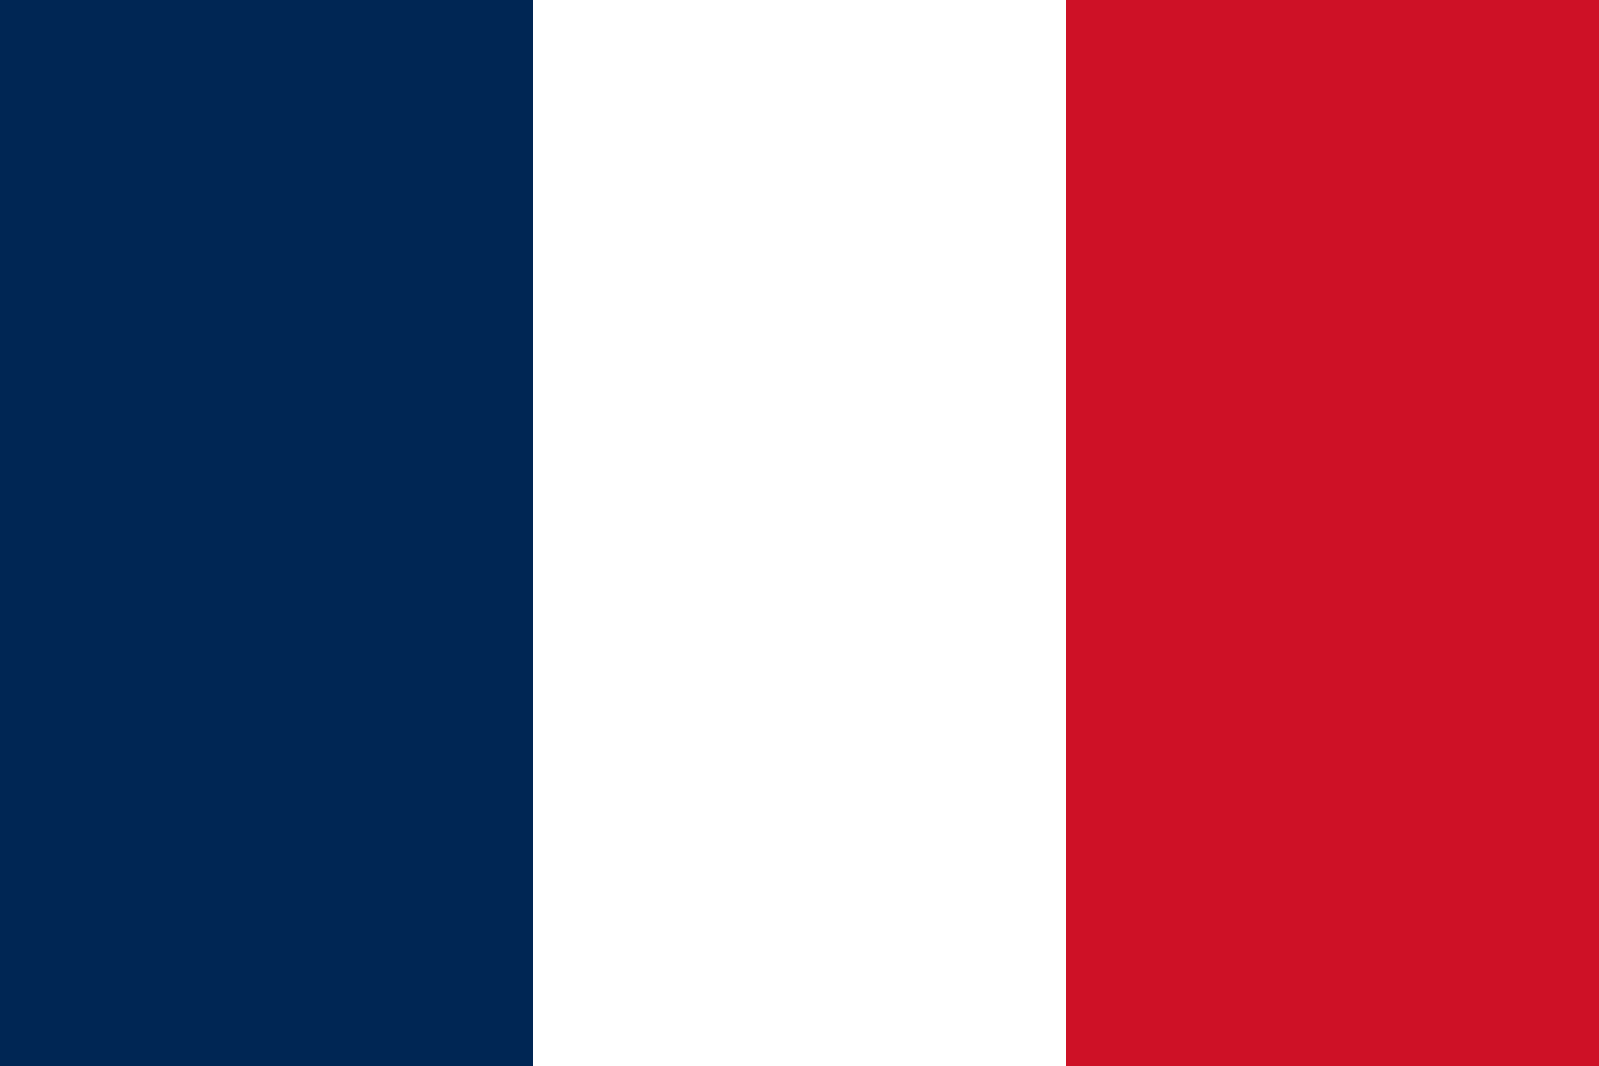 Facts about France